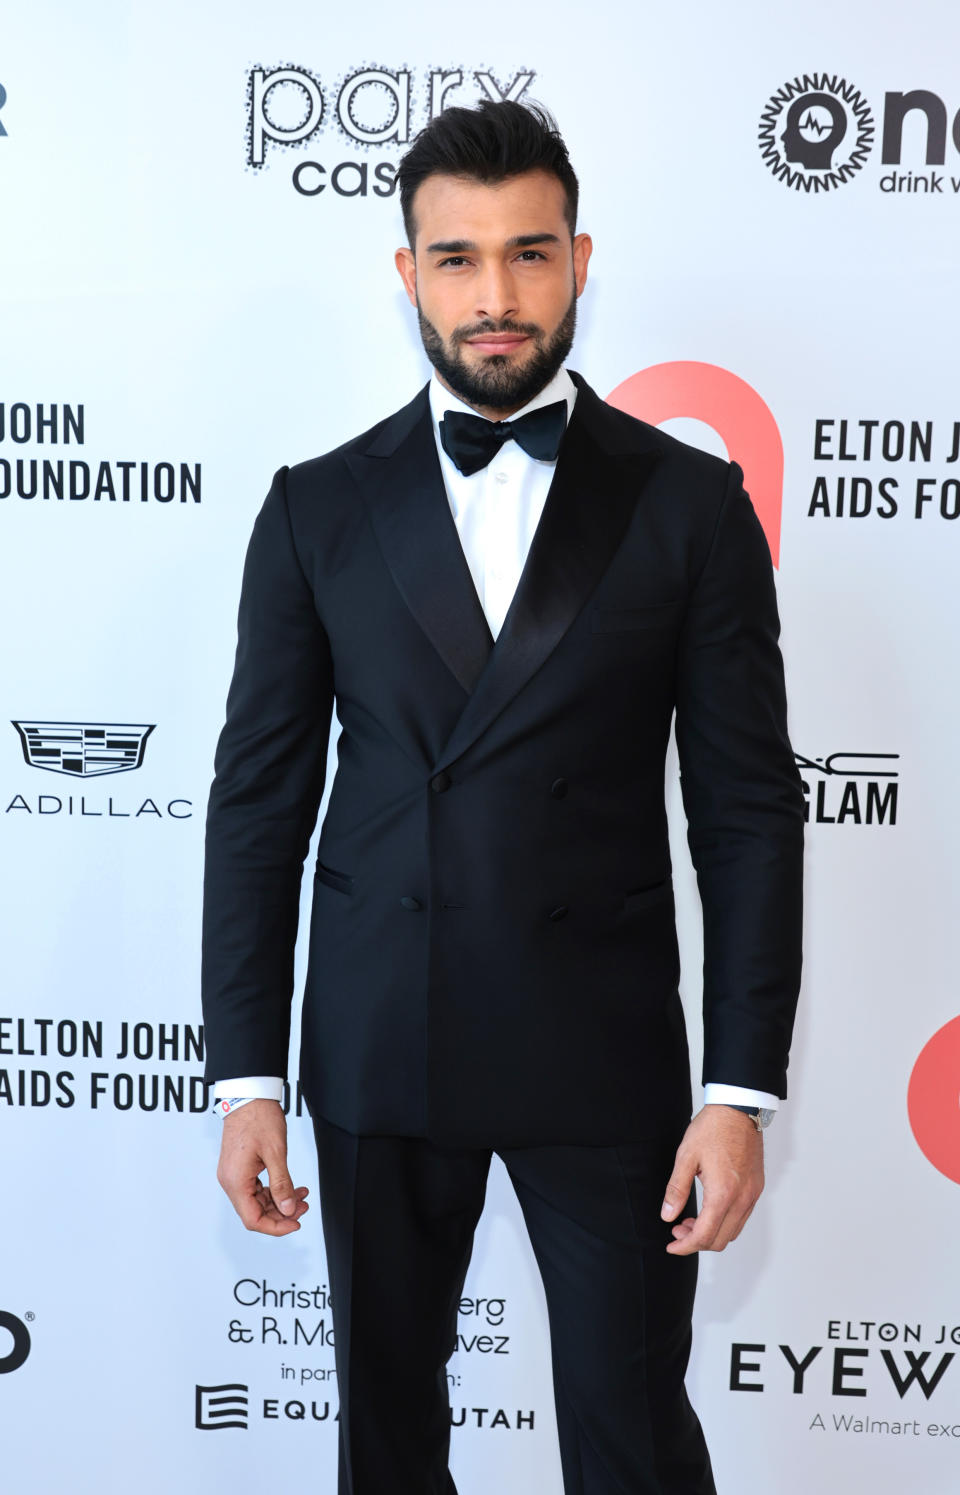   Jamie Mccarthy / Getty Images for Elton John AIDS Foundation